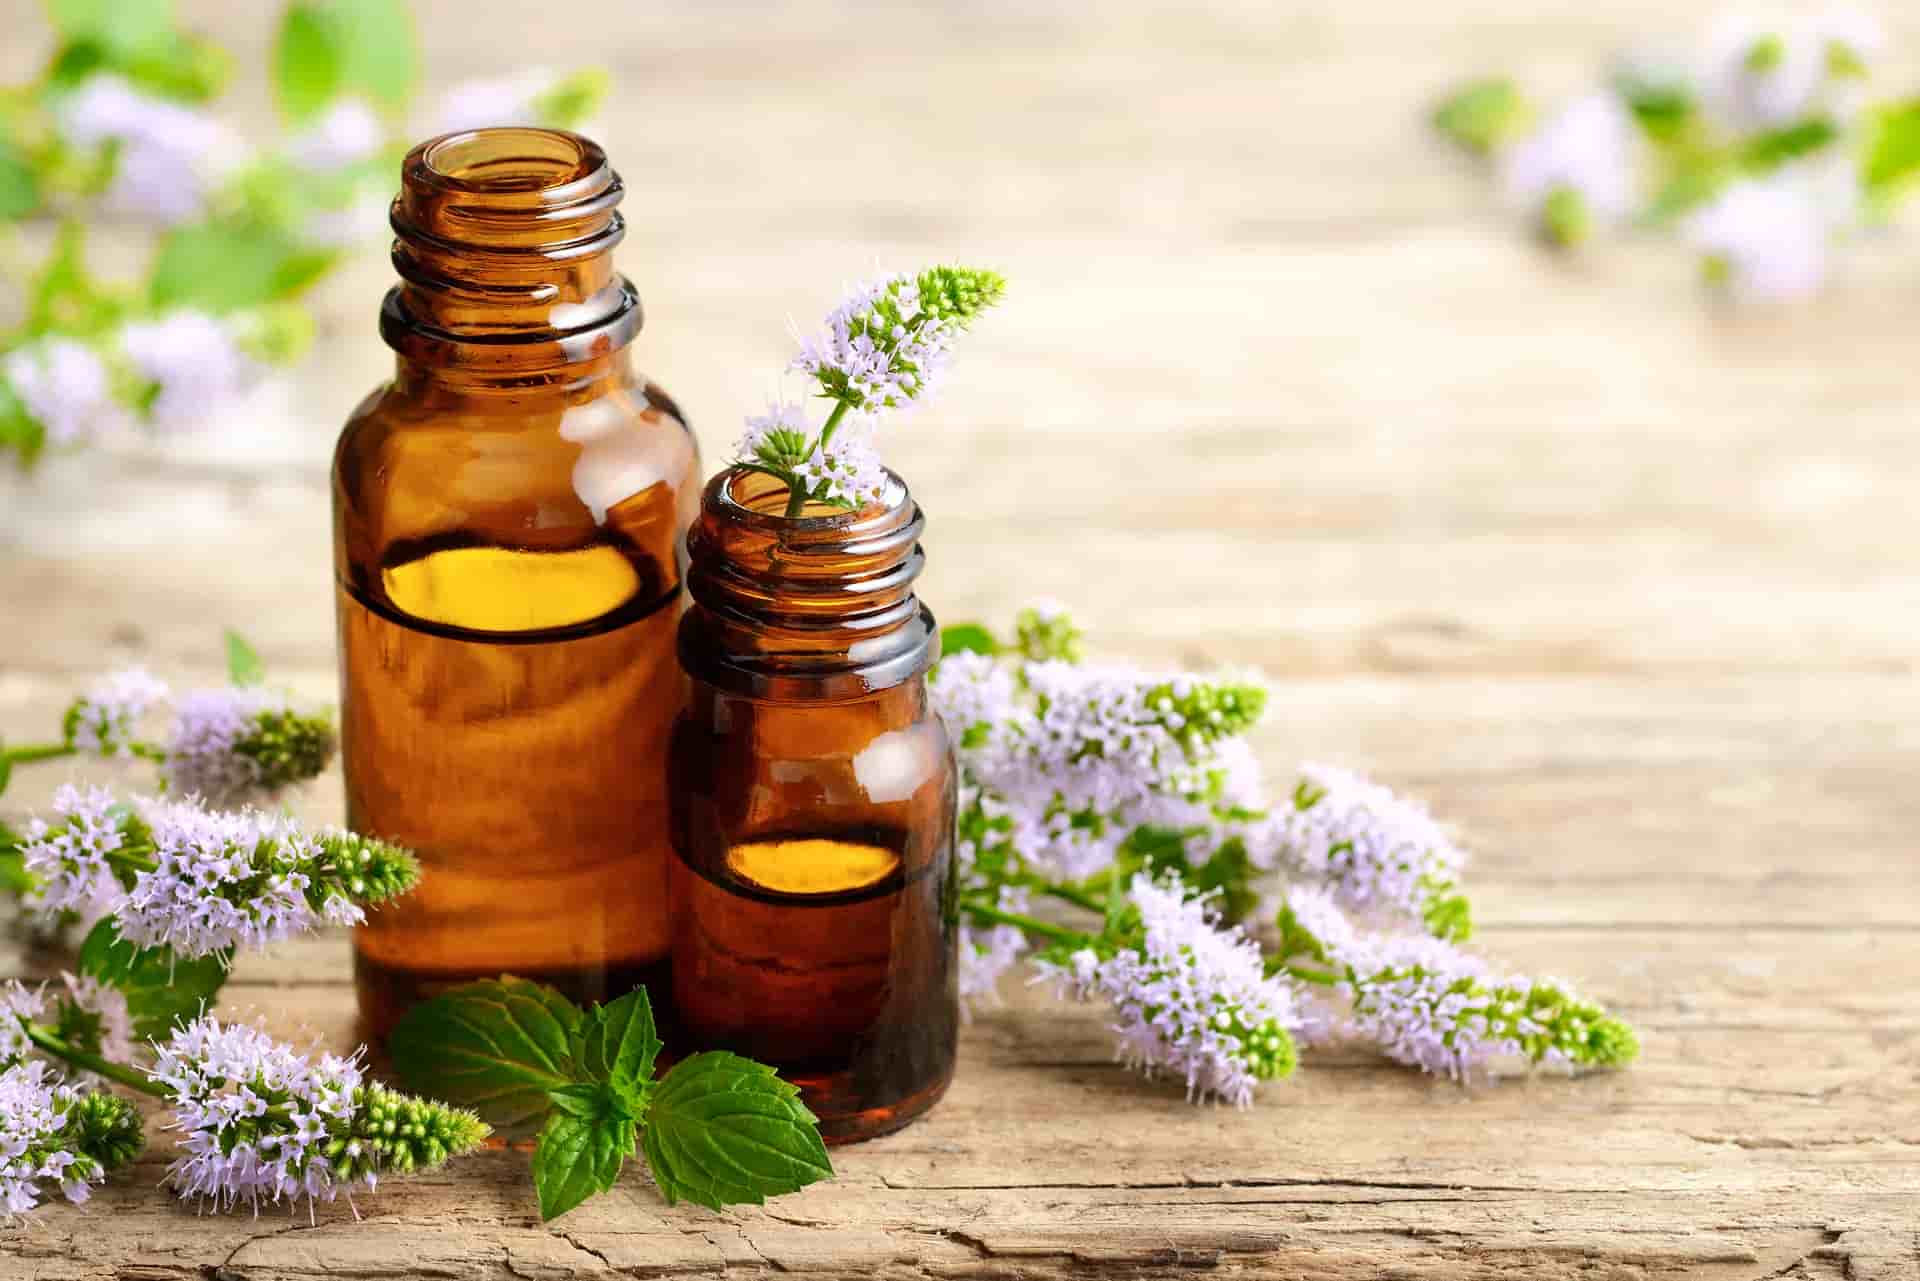 Make your own infused oils with herbs & flowers